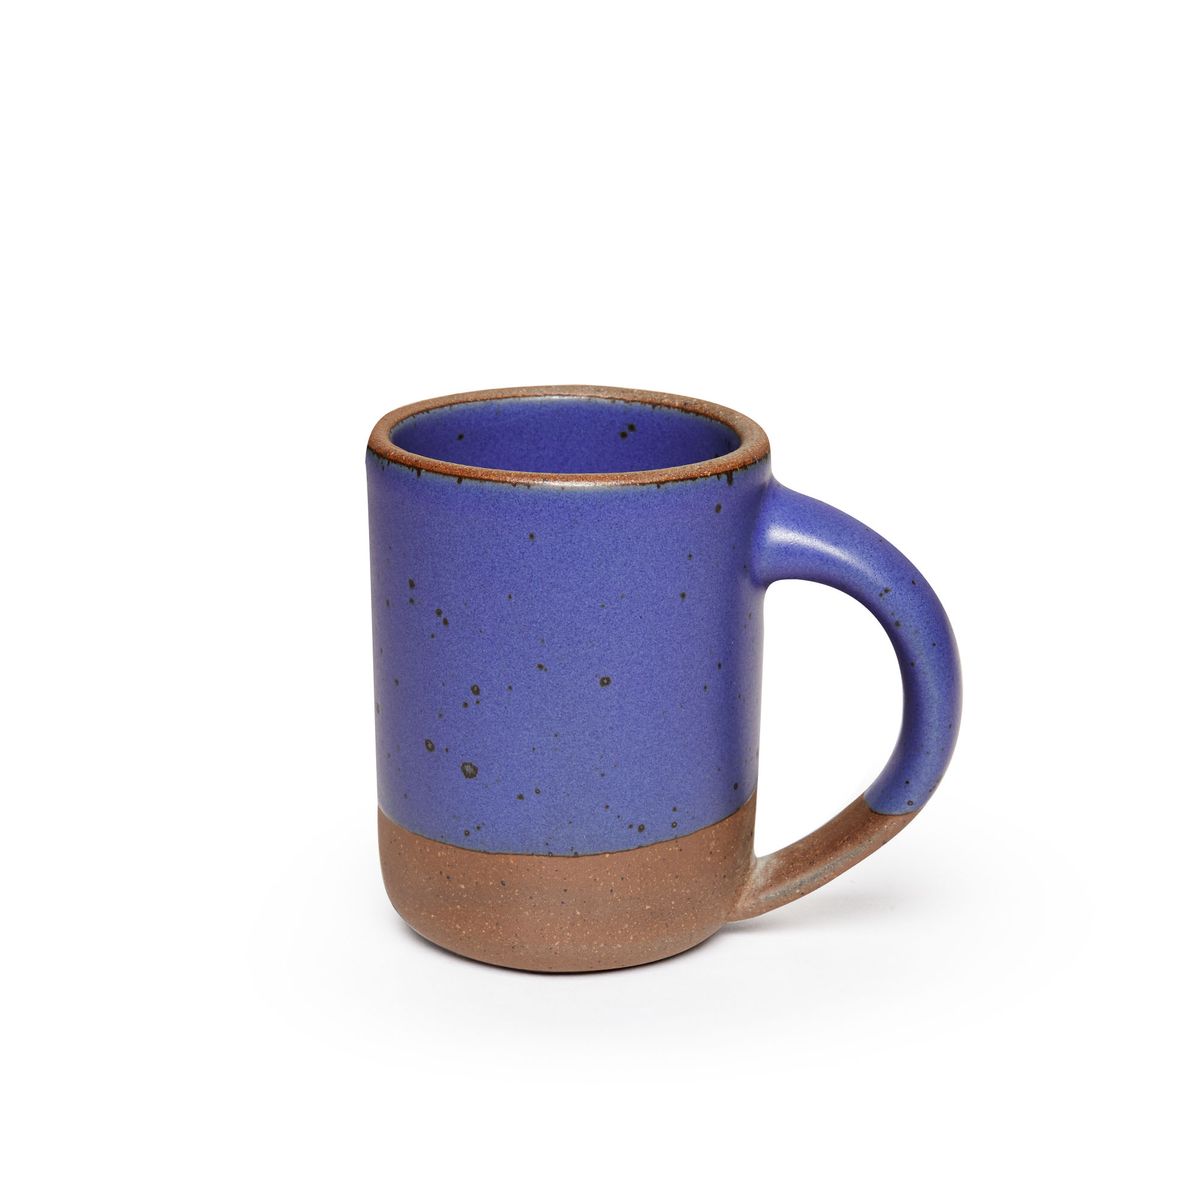 A medium sized ceramic mug with handle in a true cool blue color featuring iron speckles and unglazed rim and bottom base.